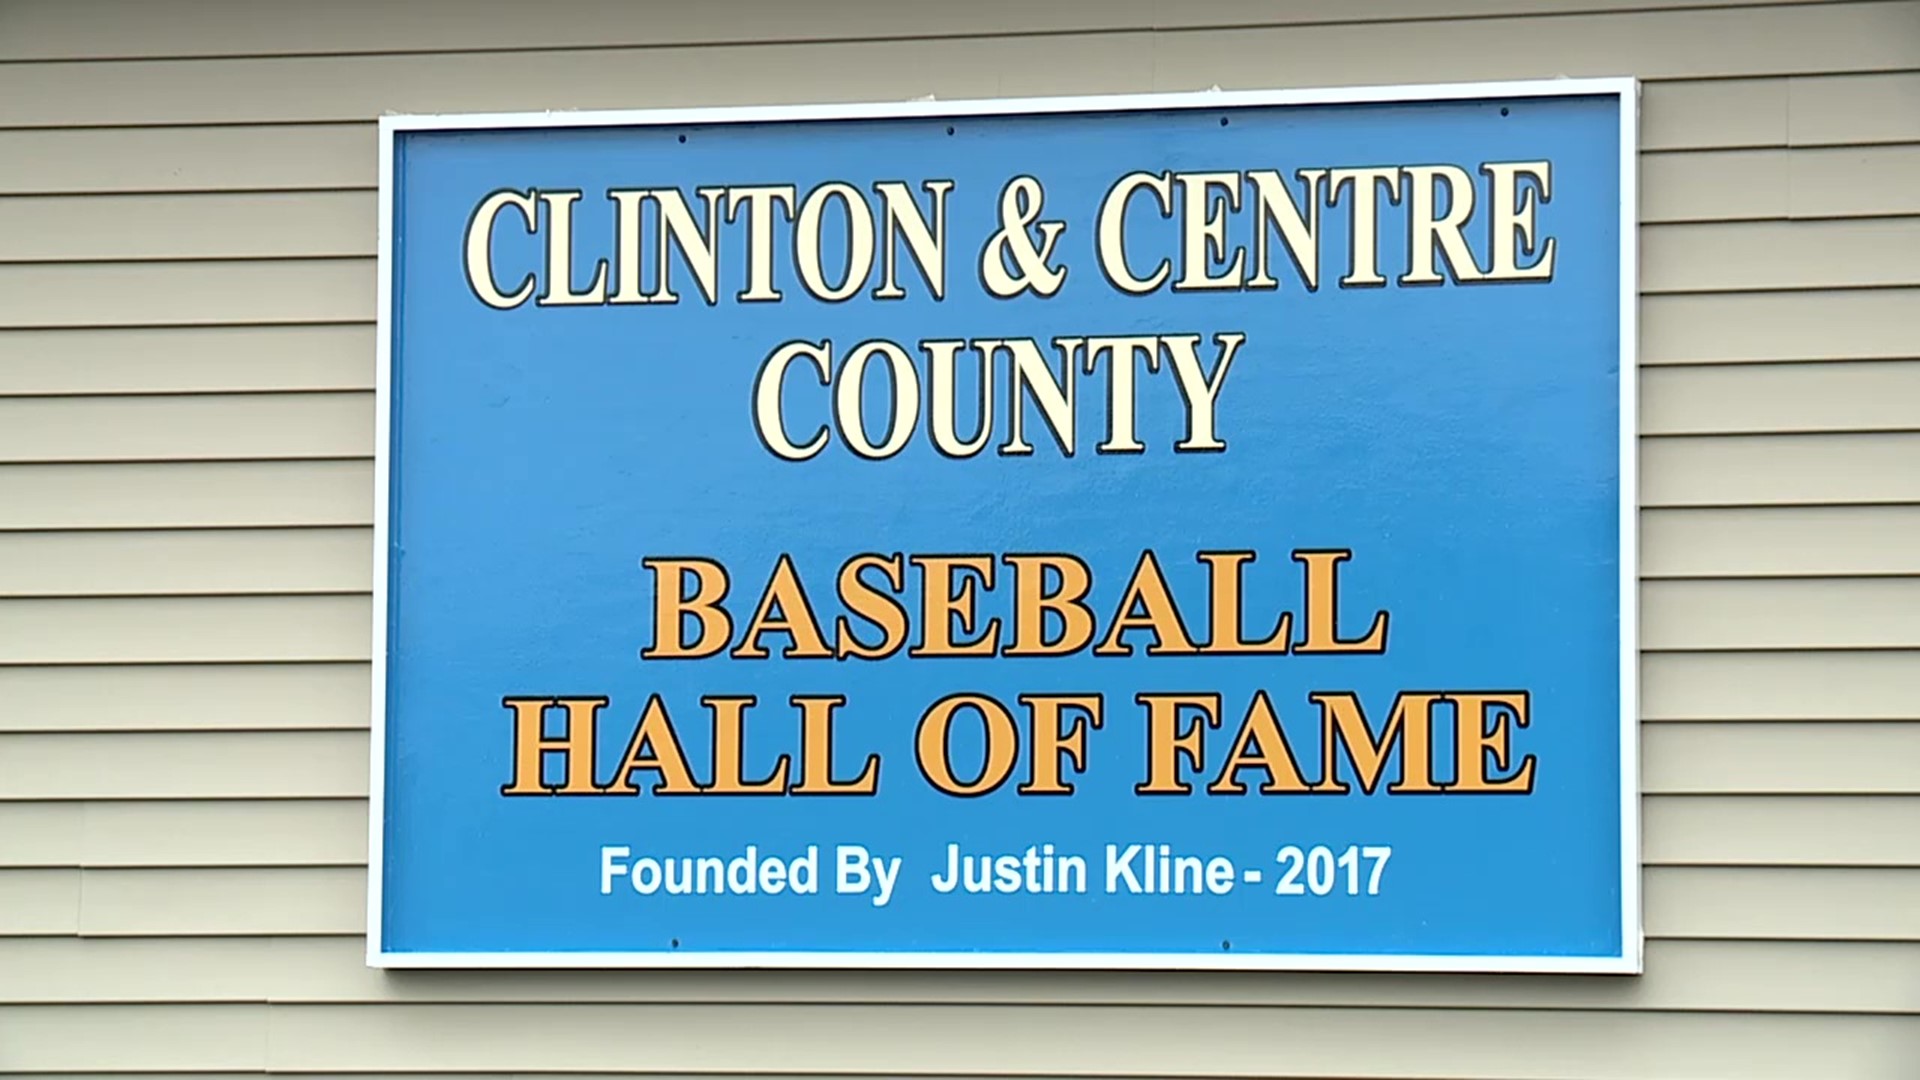 Justin Kline recently opened up the Clinton and Centre County Baseball Hall of Fame.